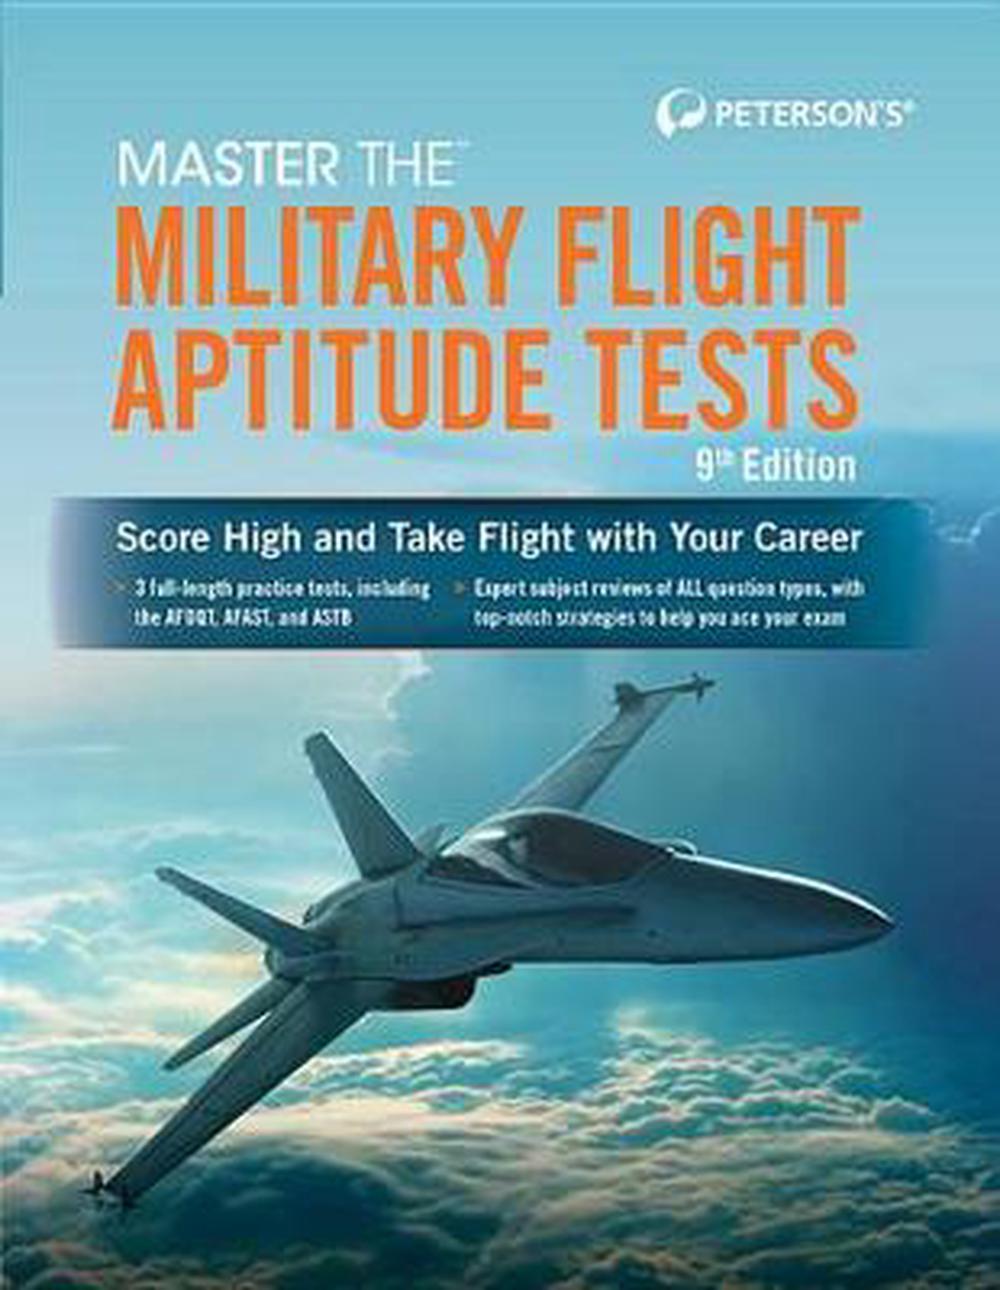 master-the-military-flight-aptitude-tests-by-peterson-s-english-paperback-book-9780768941135